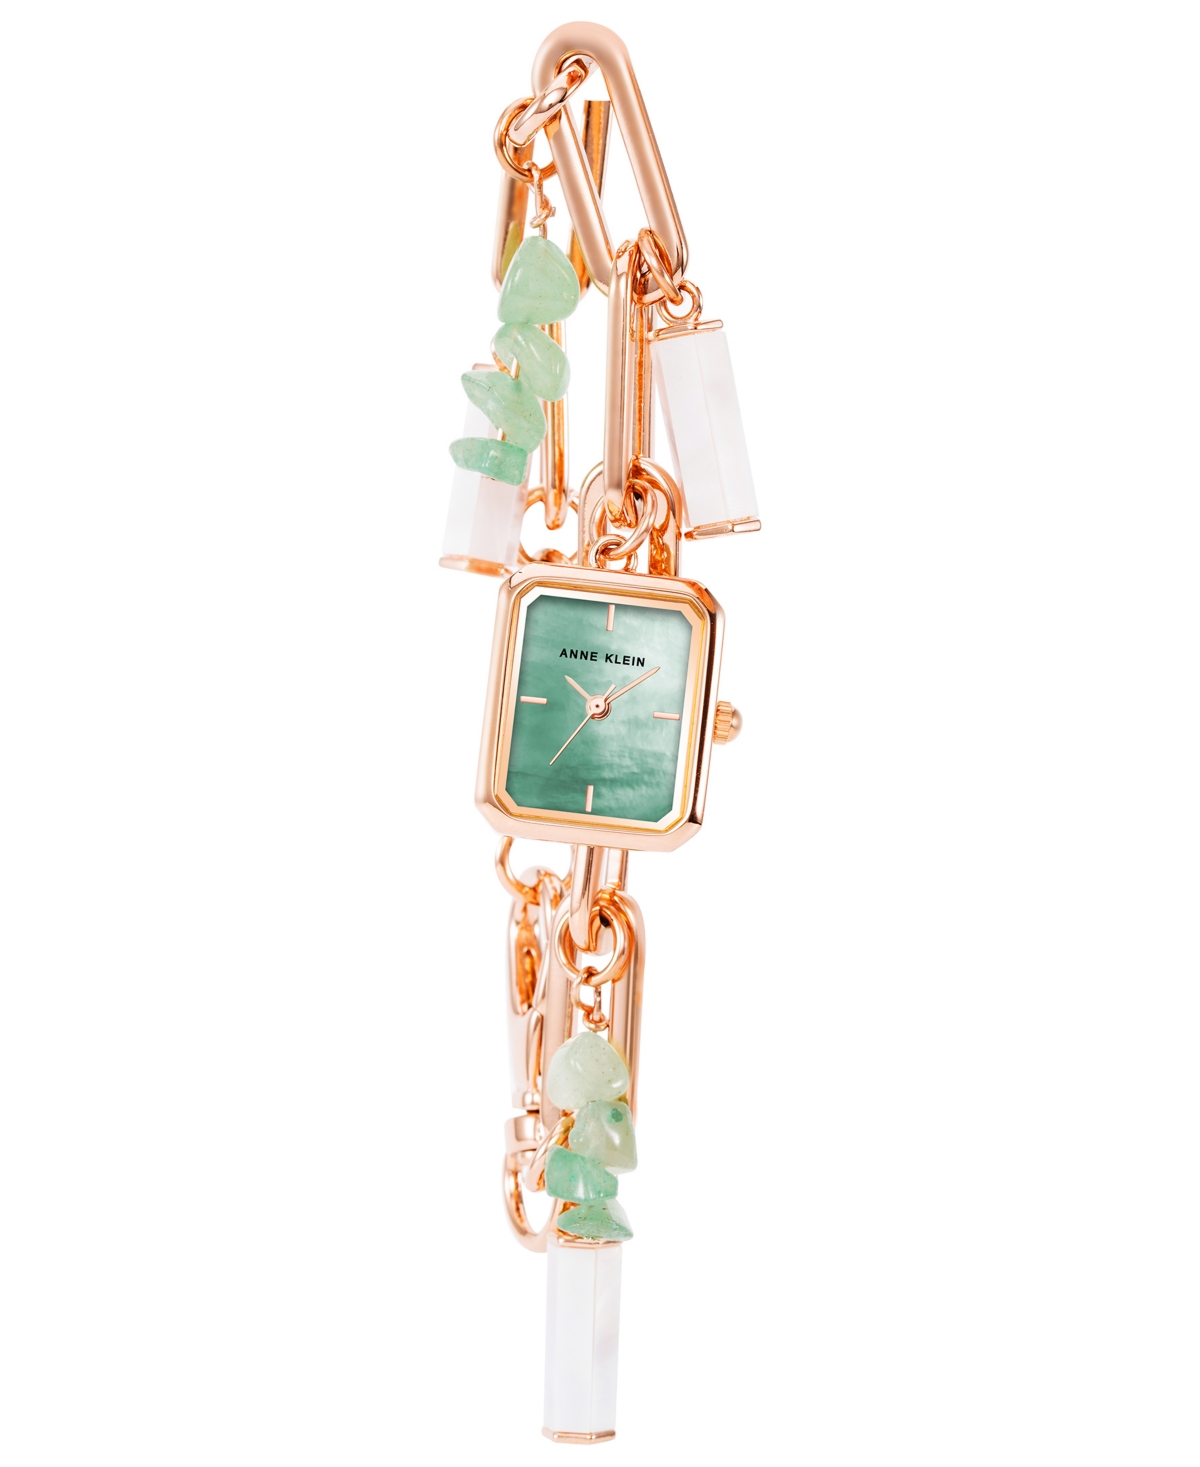 Anne Klein Women's Three Hand Rose Gold-tone Alloy Charm Watch, 18mm X 21.5mm In Rose Gold-tone,green